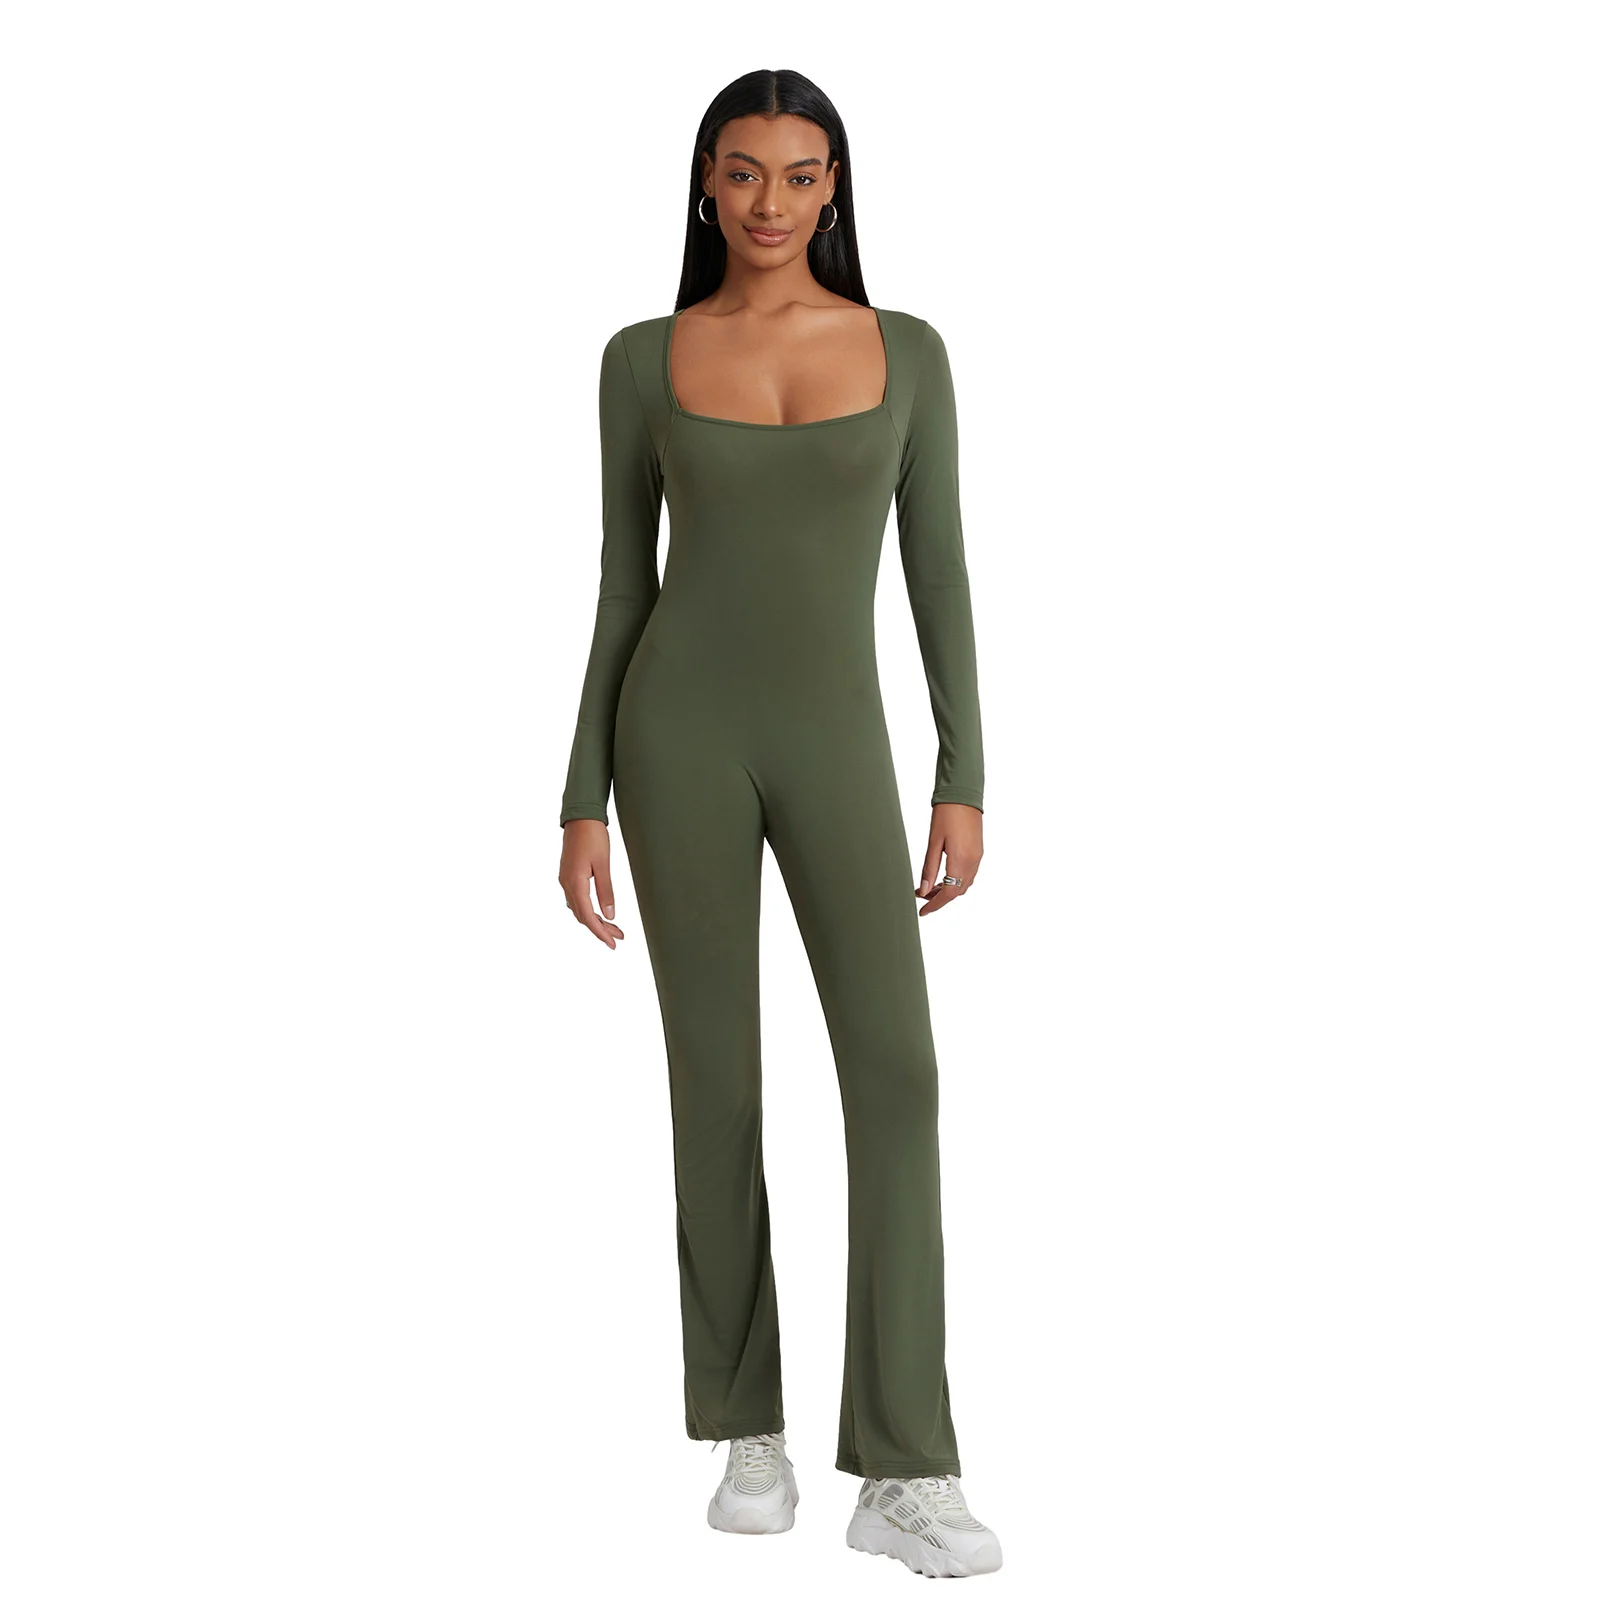 

Tight Fitting Square Neck Wide Leg Full Length Romper Playsuit Long Sleeve Jumpsuit Women Bodycon Women's Long Overalls